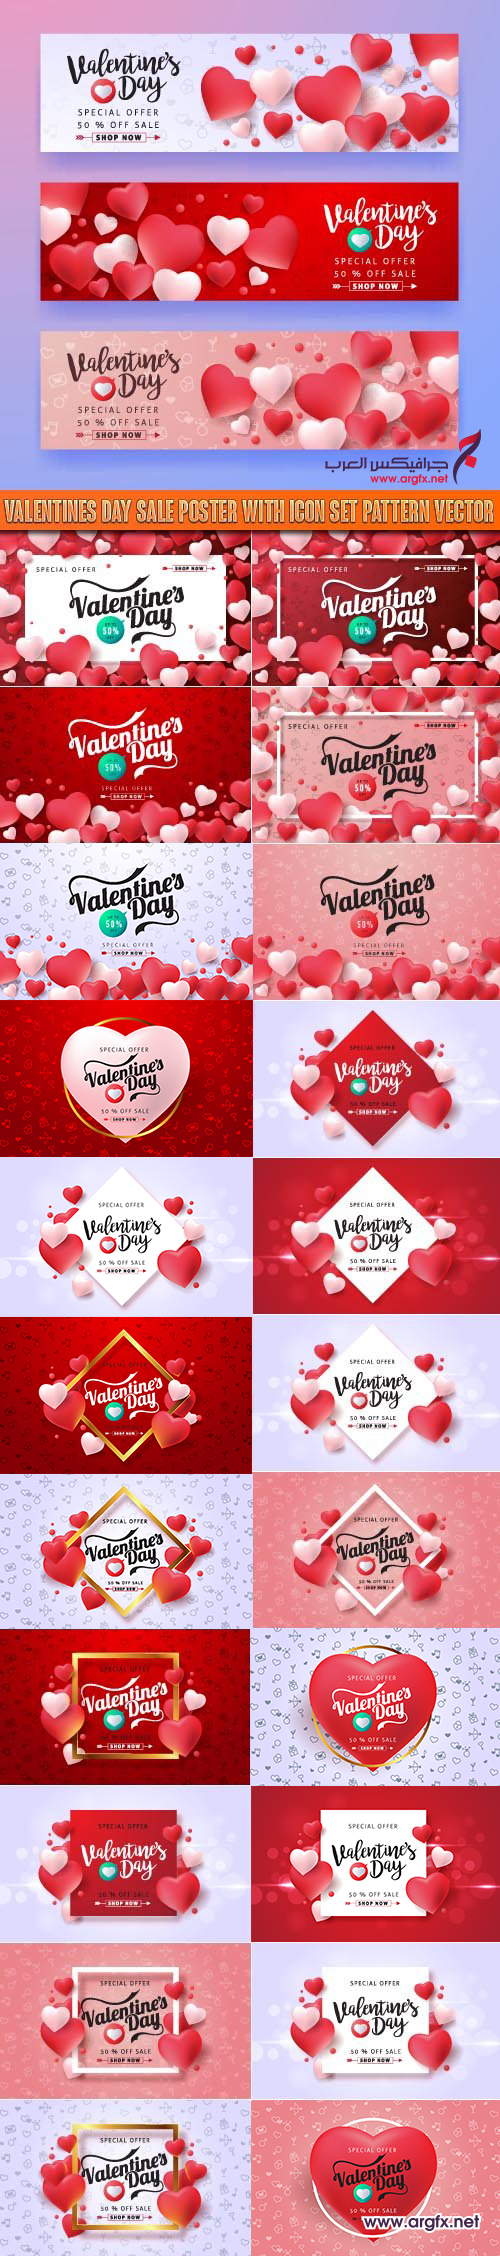  Valentines day sale poster with icon set pattern vector